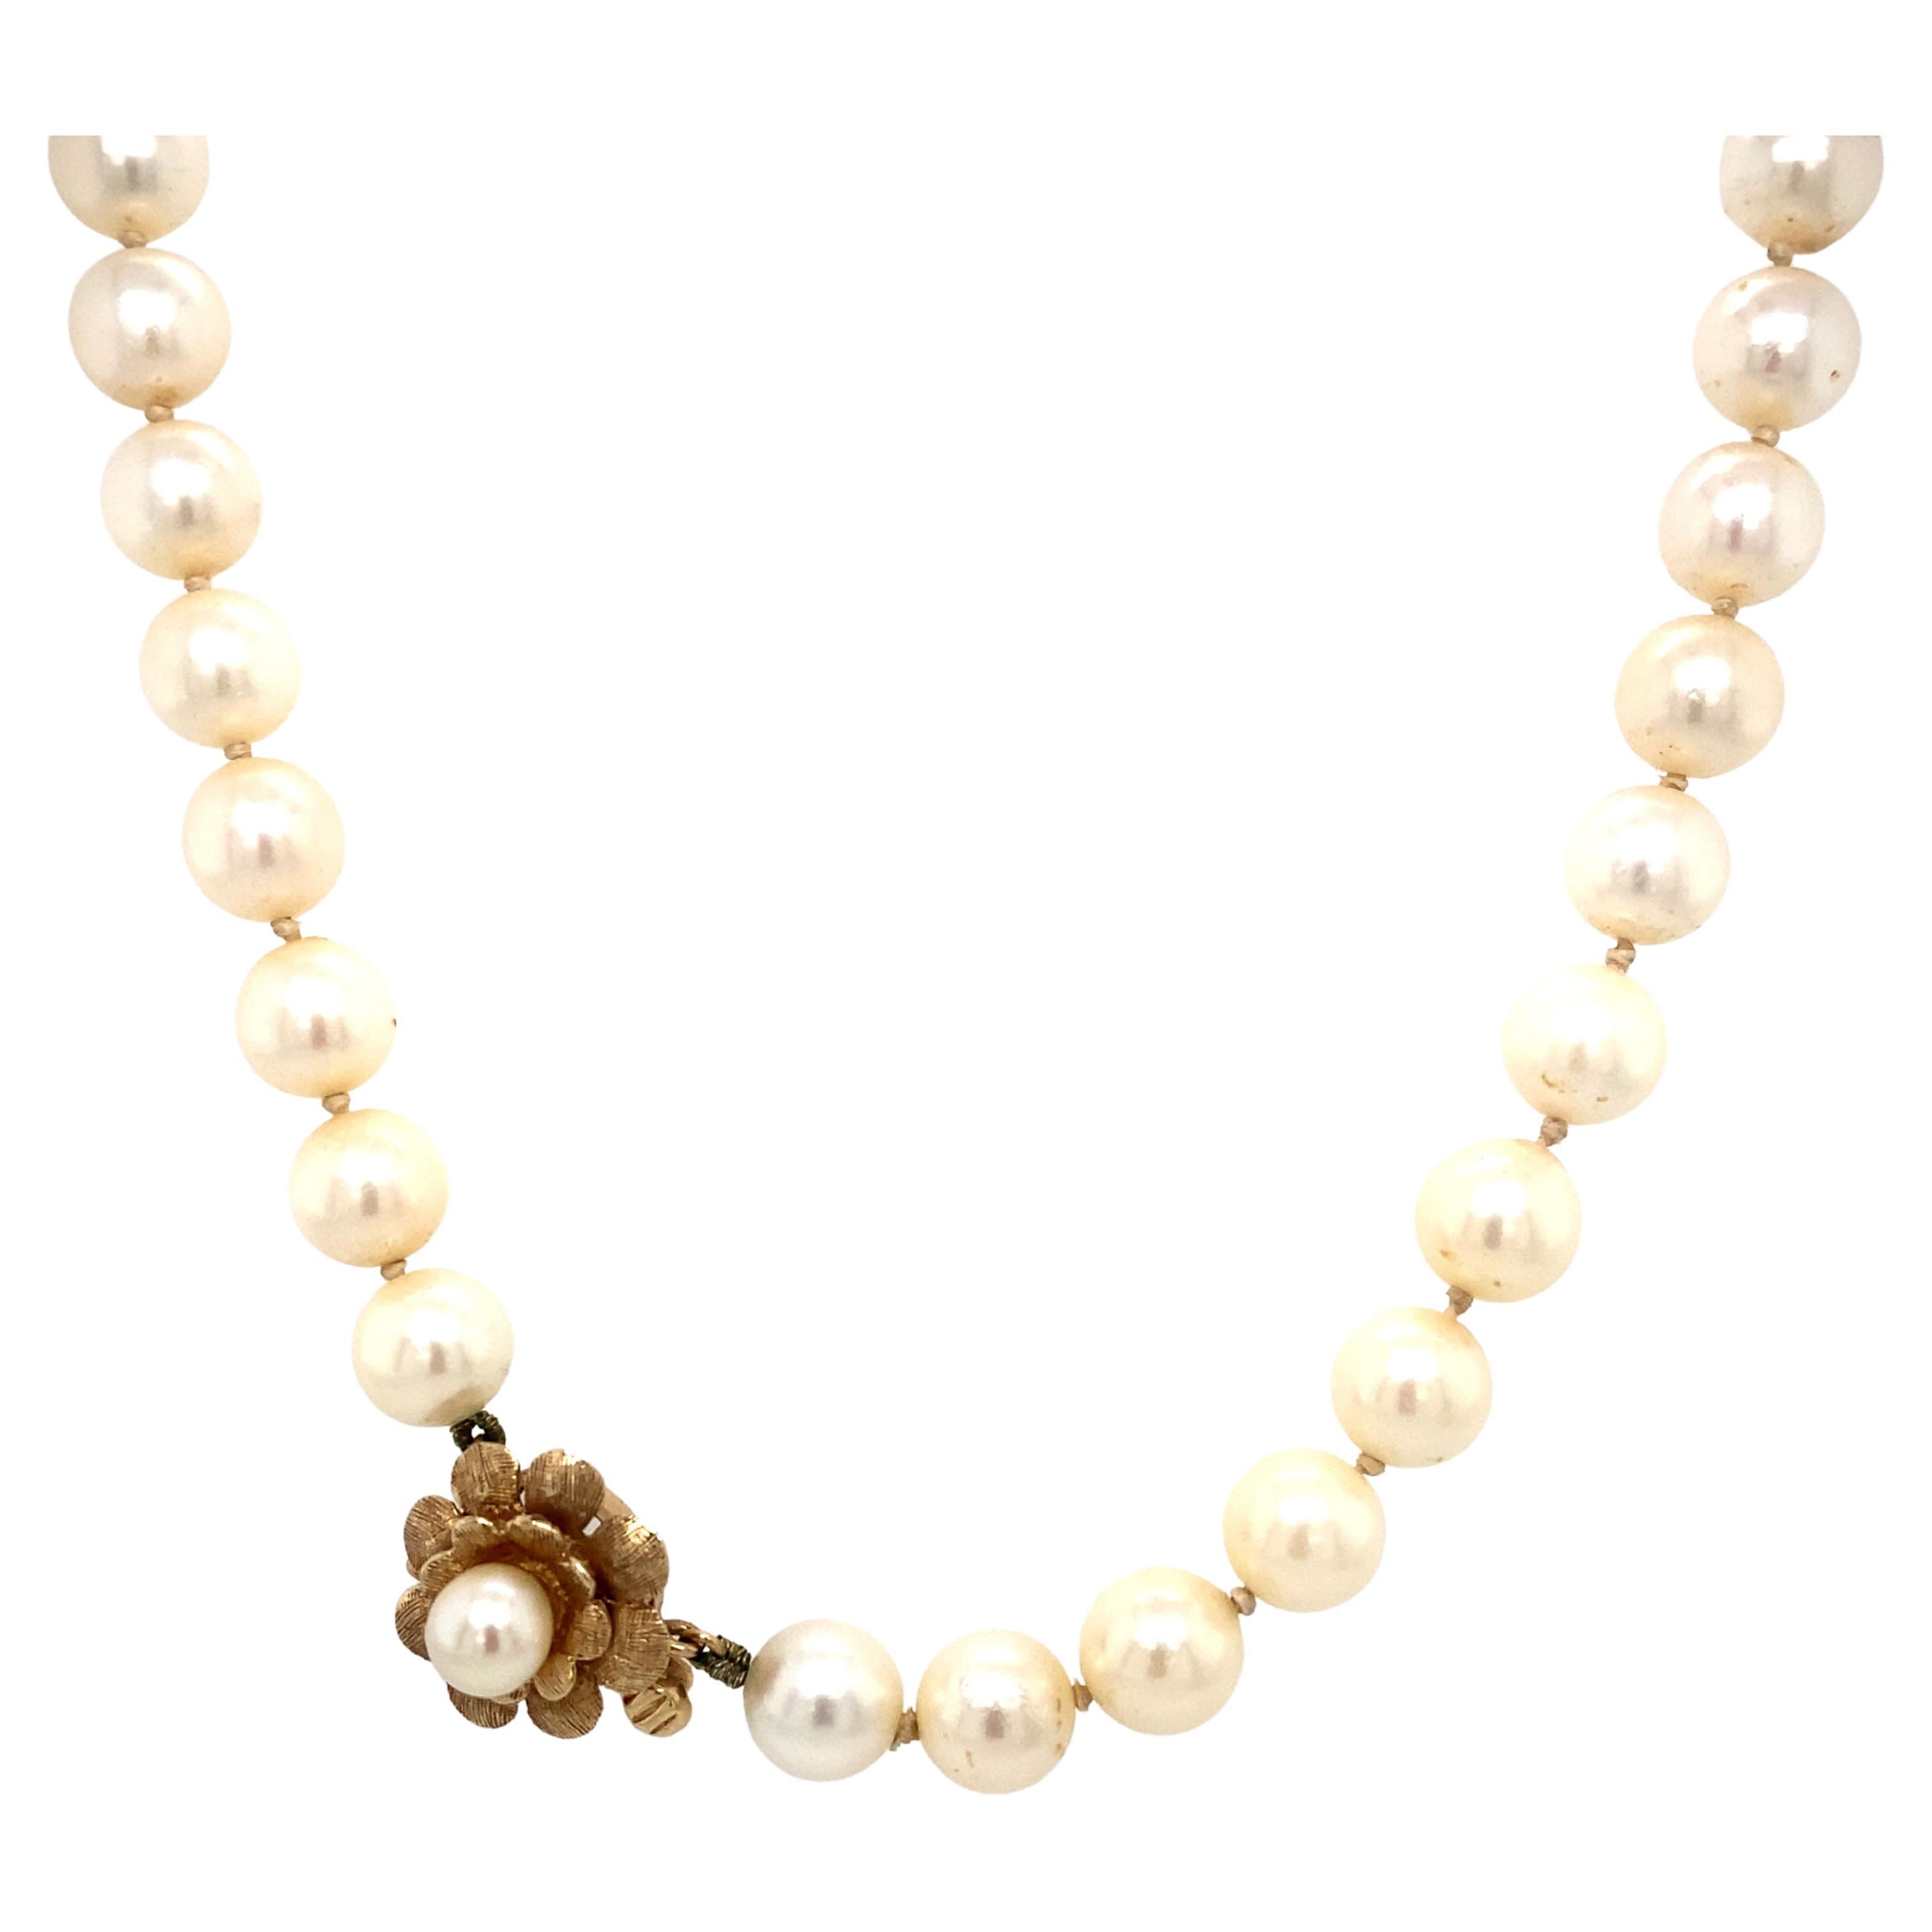 Pearl Necklace with Flower Clasp in 14 Karat Gold